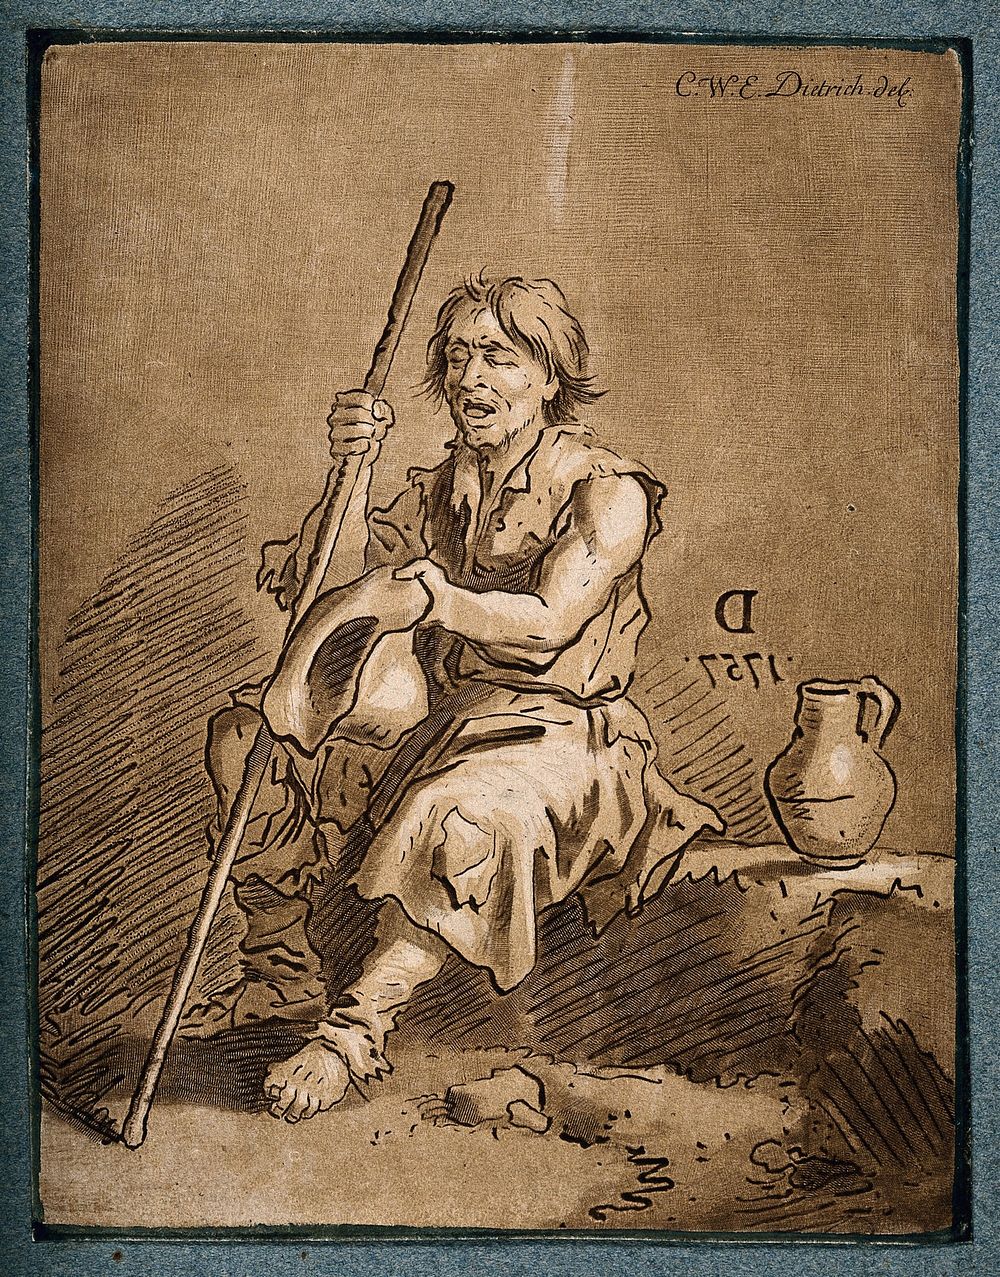 A blind beggar holds out his hat for money. Coloured mezzotint by C.W.E. Dietrich, 1757.